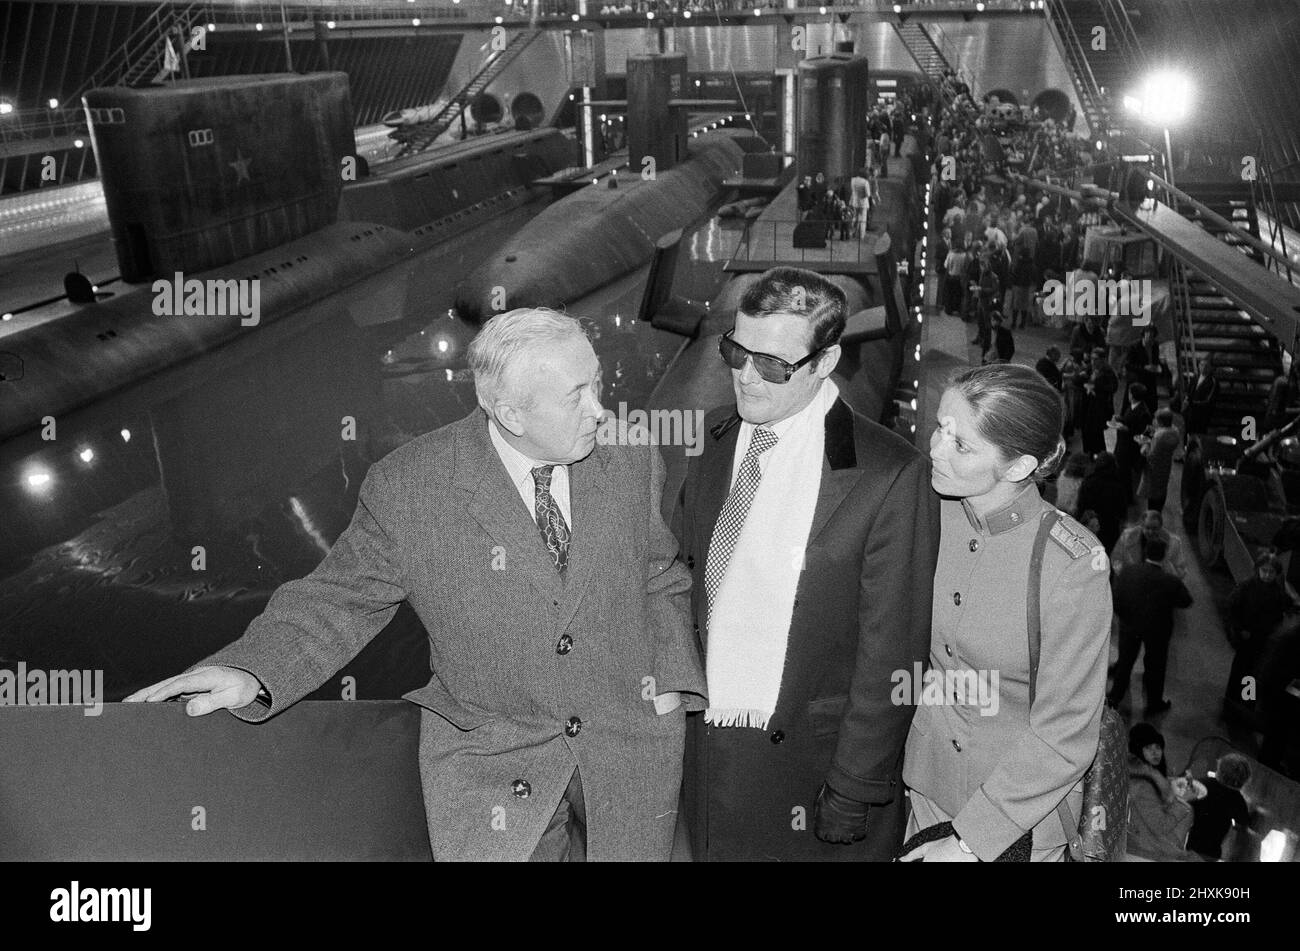 Sir Harold Wilson visited Pinewood Studios to officially open the largest film stage in the world which was created for scenes featuring a super tanker and three submarines in the latest James Bond epic ' The Spy Who Loved Me'. Sir Harold Wilson is pictured with Roger Moore and Barbara Bach. 5th December 1976. Stock Photo